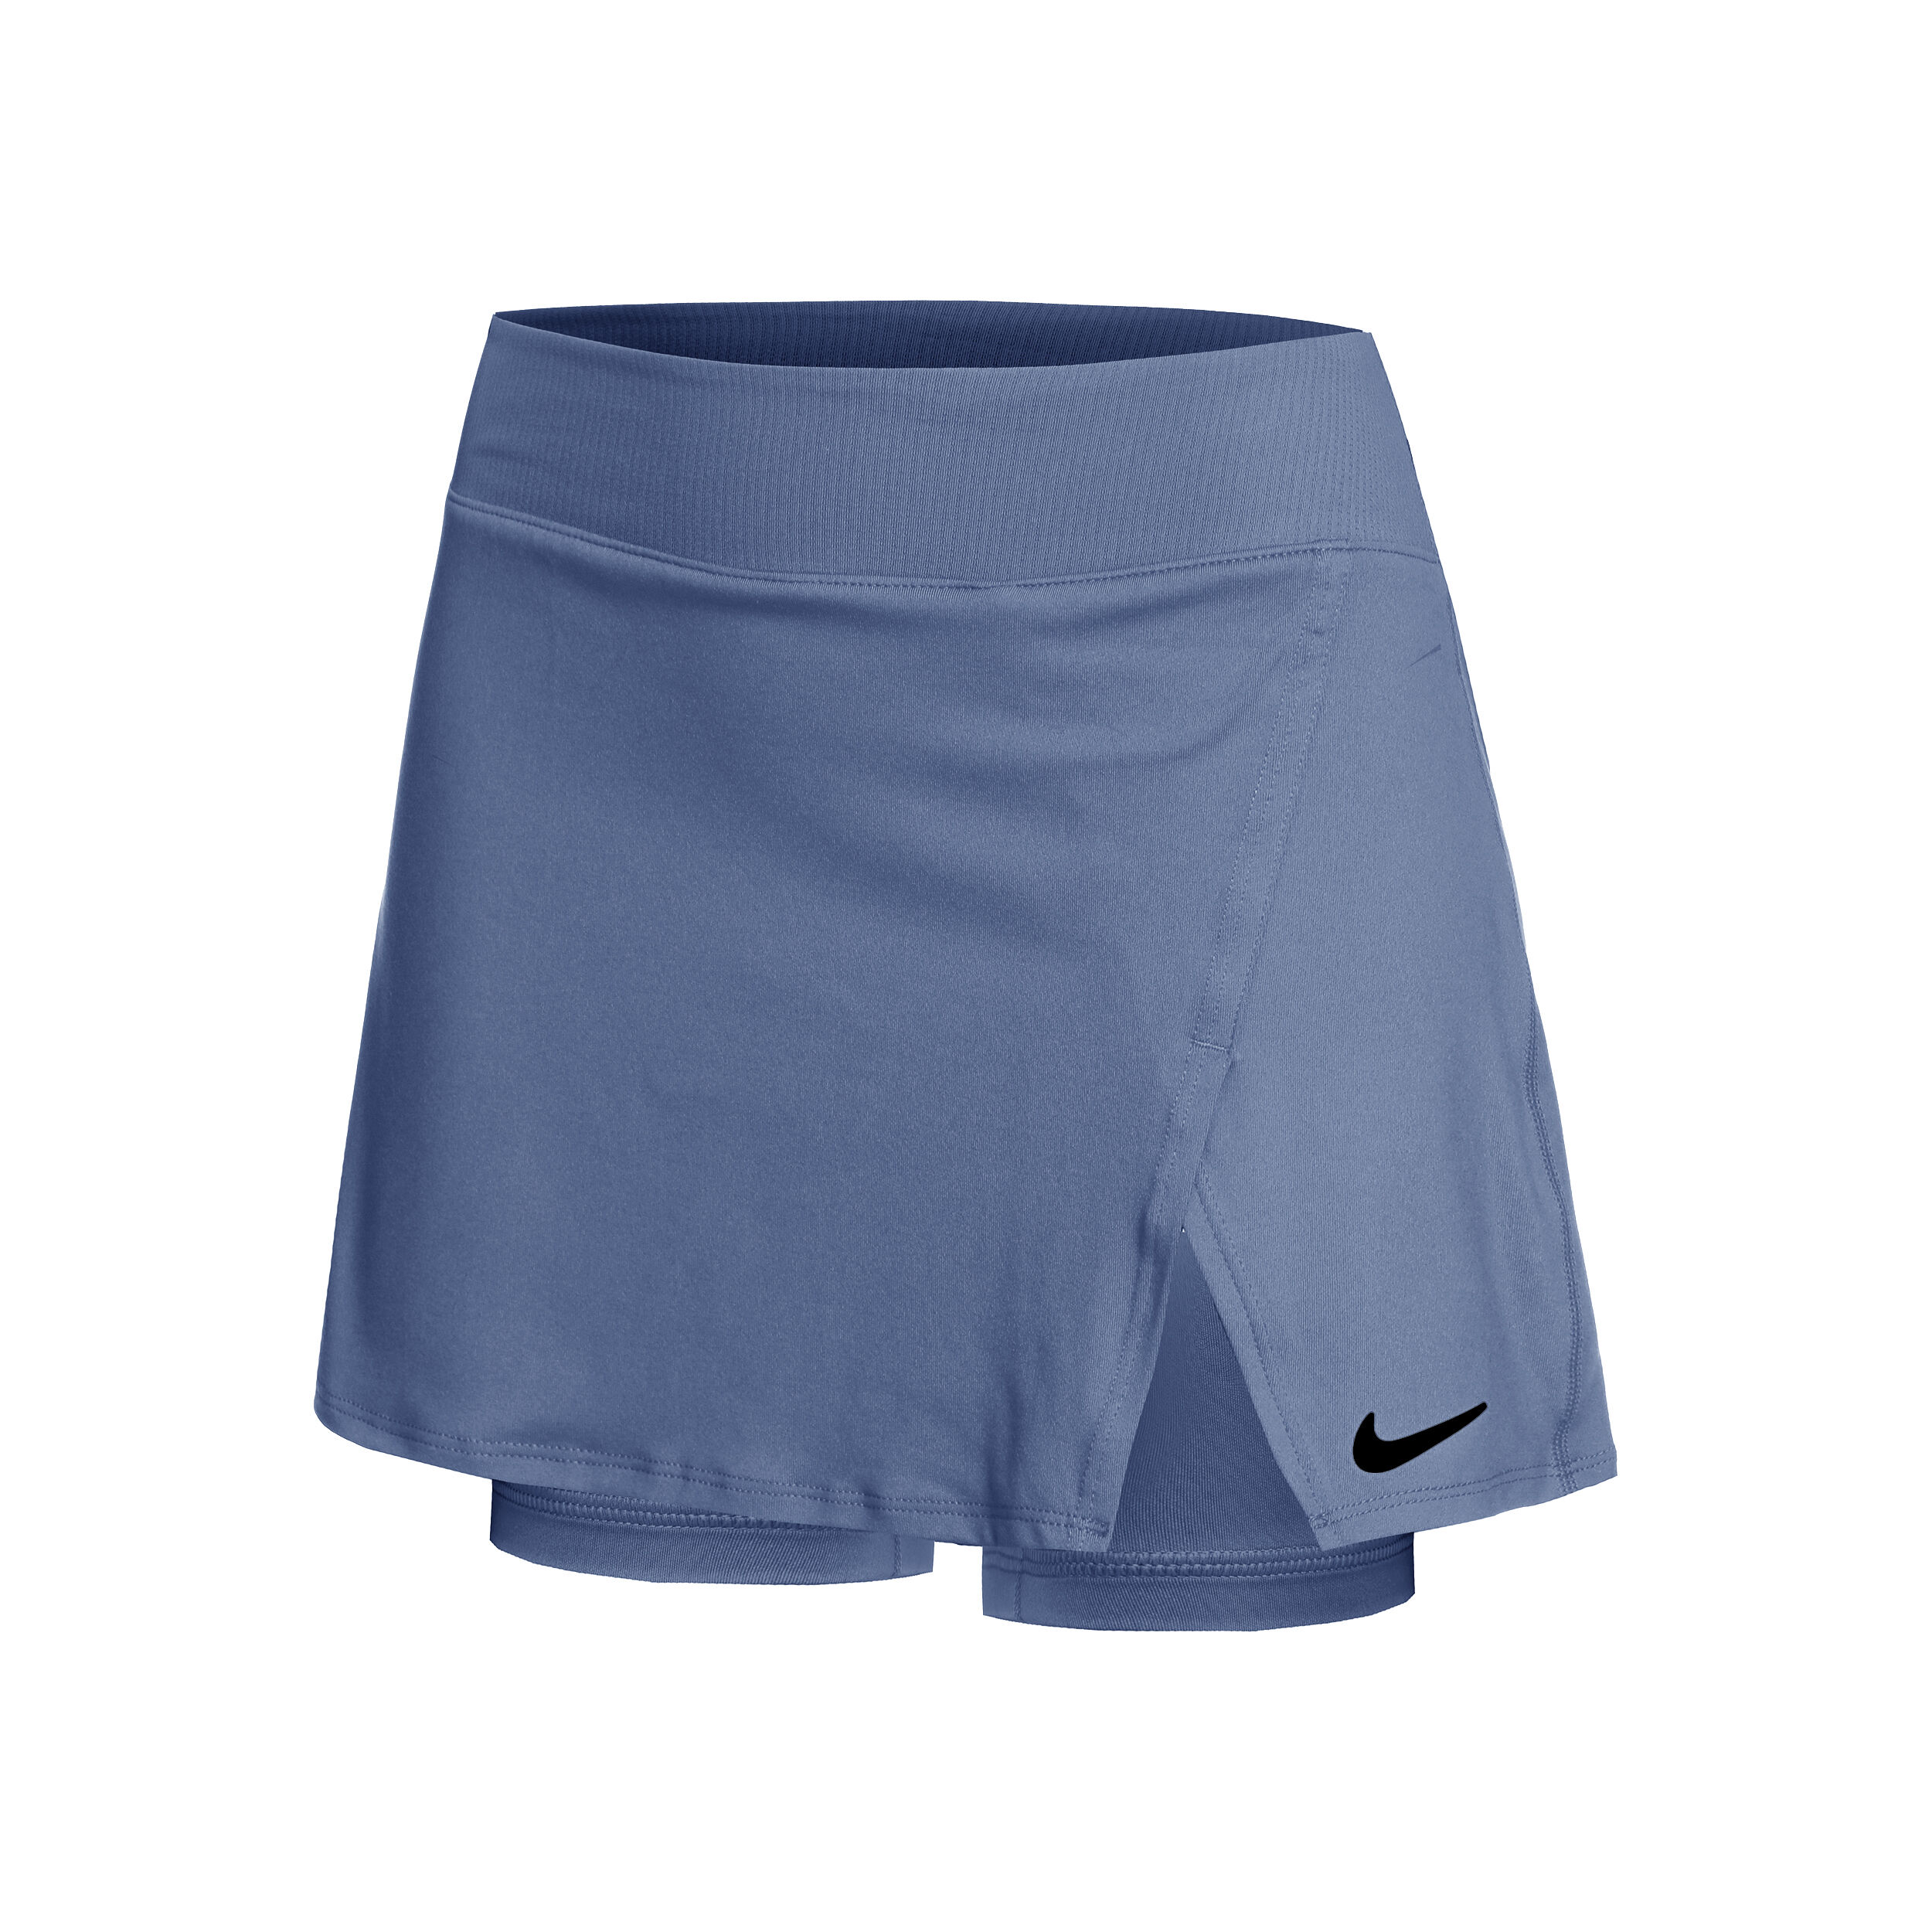 Skirts from Nike online | Padel-Point